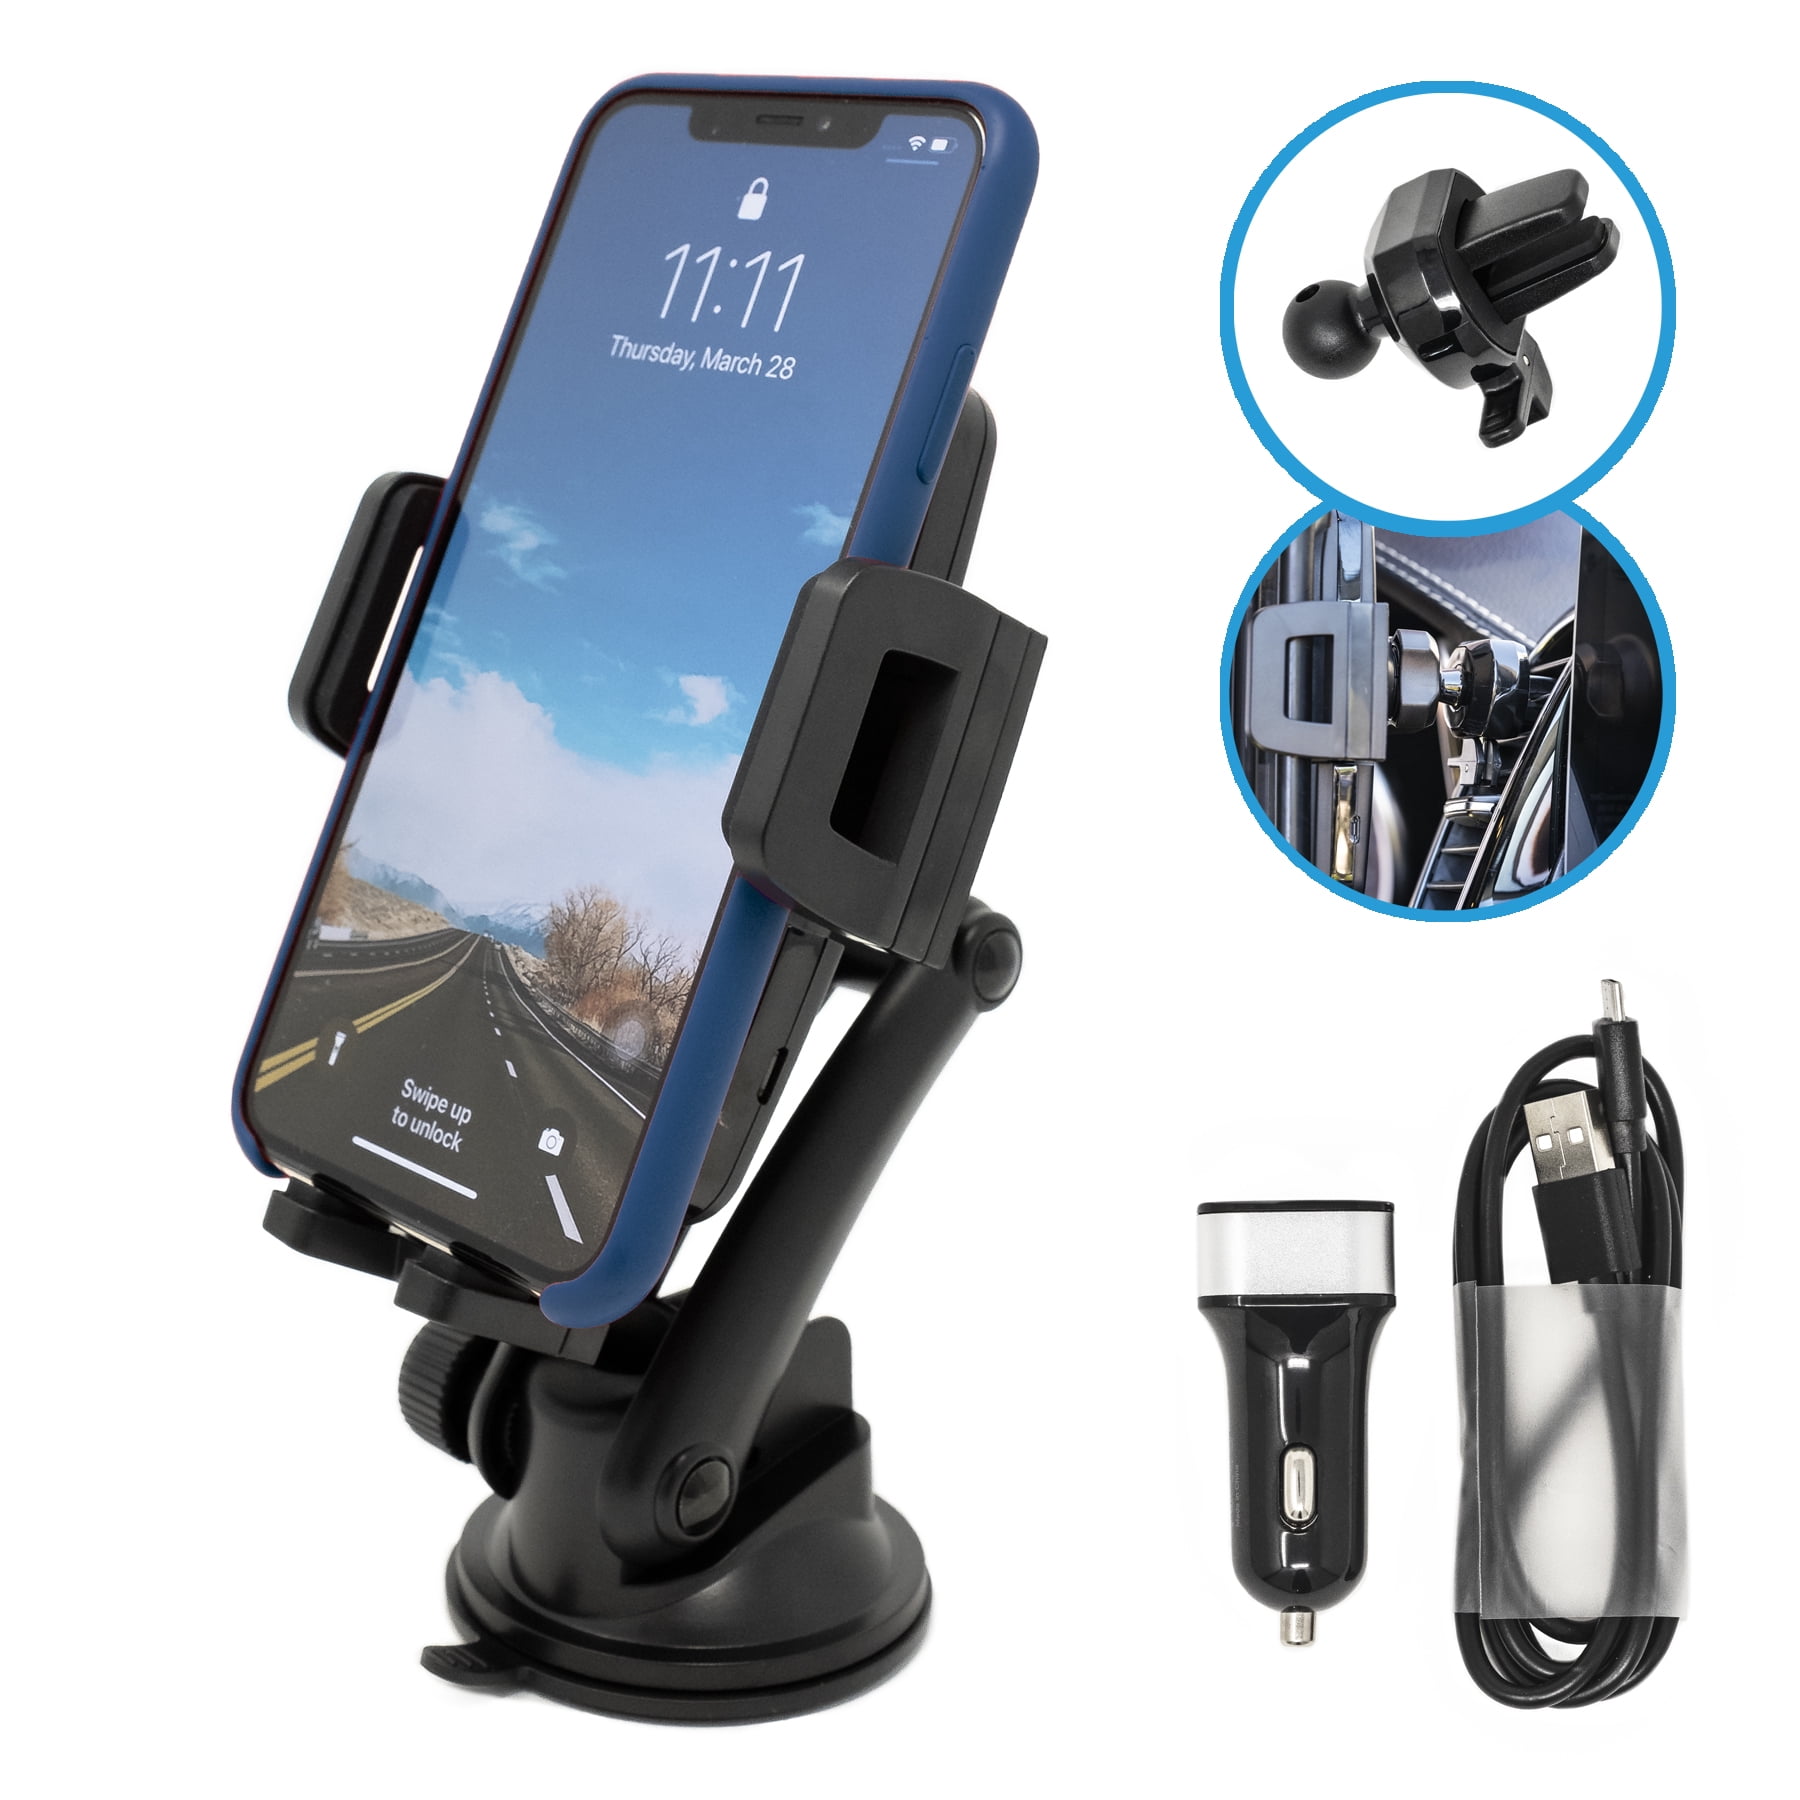 TIMESS Wireless Charger car Mount,10W Auto Sensing Clamping Car Mount Windshield Dashboard Air Vent Phone Holde Compatible with iPhone Xs/Xs Max/XR/X/ 8/8 Plus Samsung S10/S10+/S9/S9+/S8/S8+ 